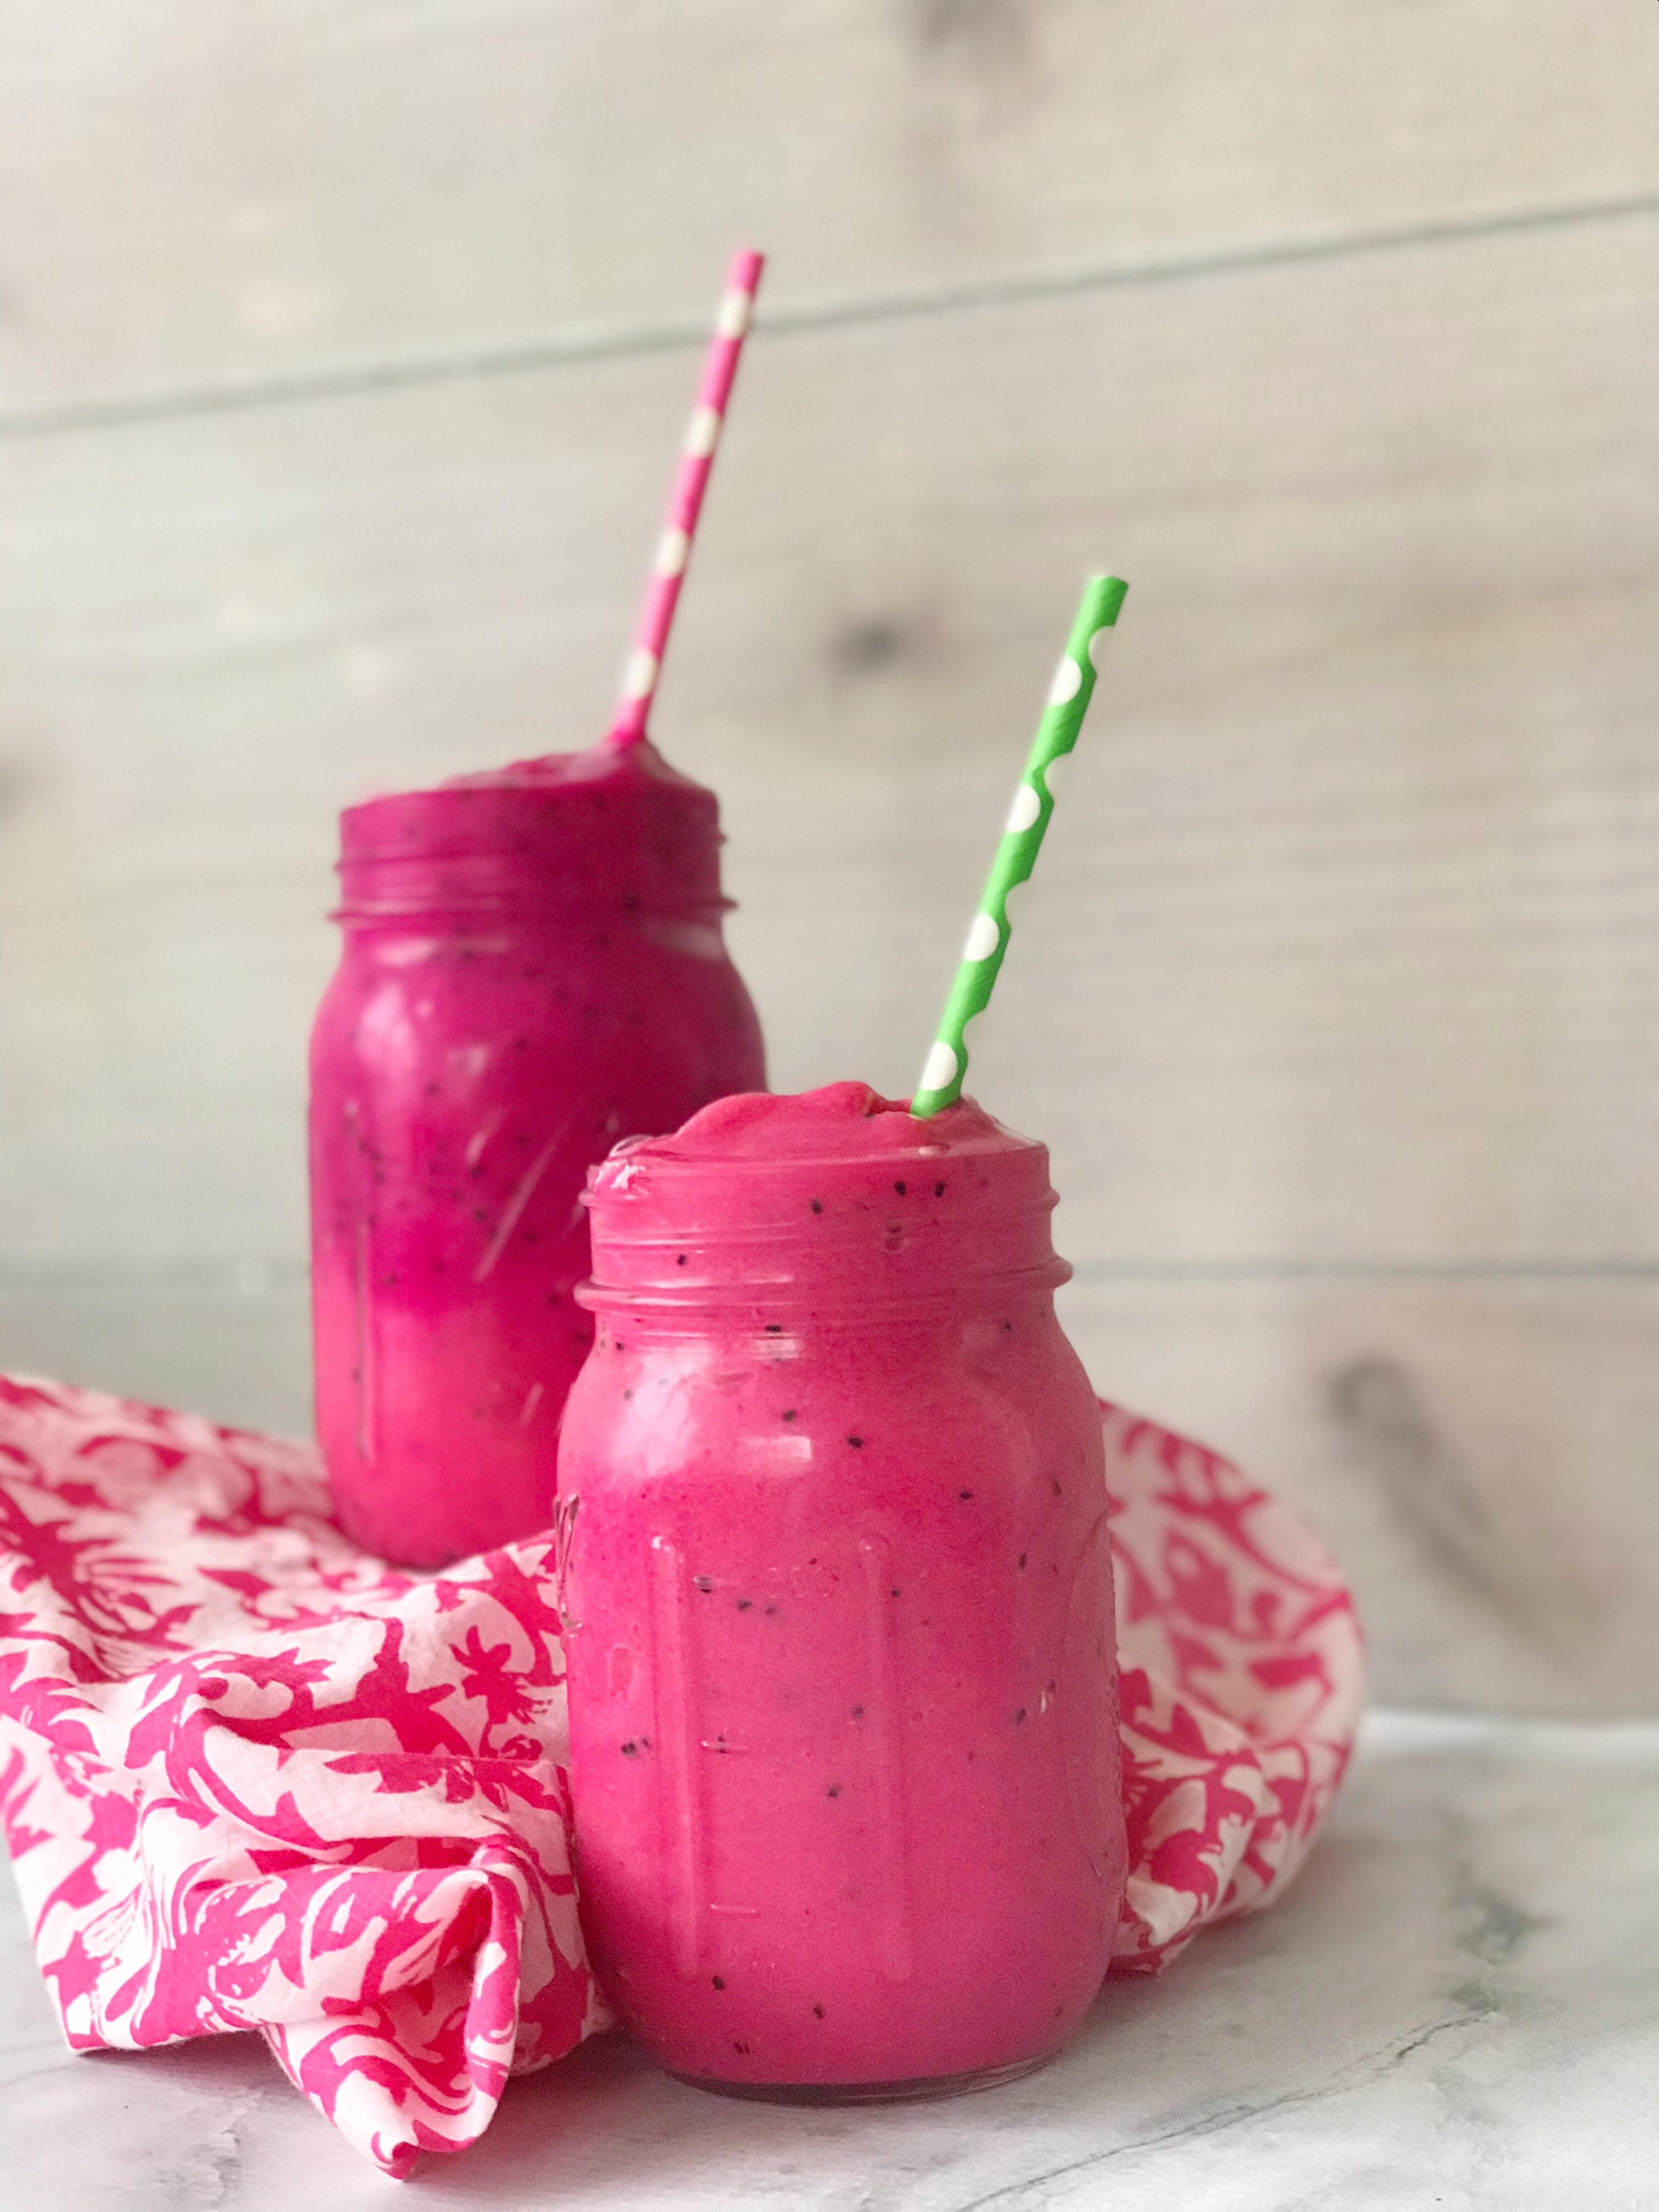 dragon fruit smoothie, dragon fruit smoothie recipe, dragon fruit recipe, easy smoothie recipe, smoothie, post-workout smoothie